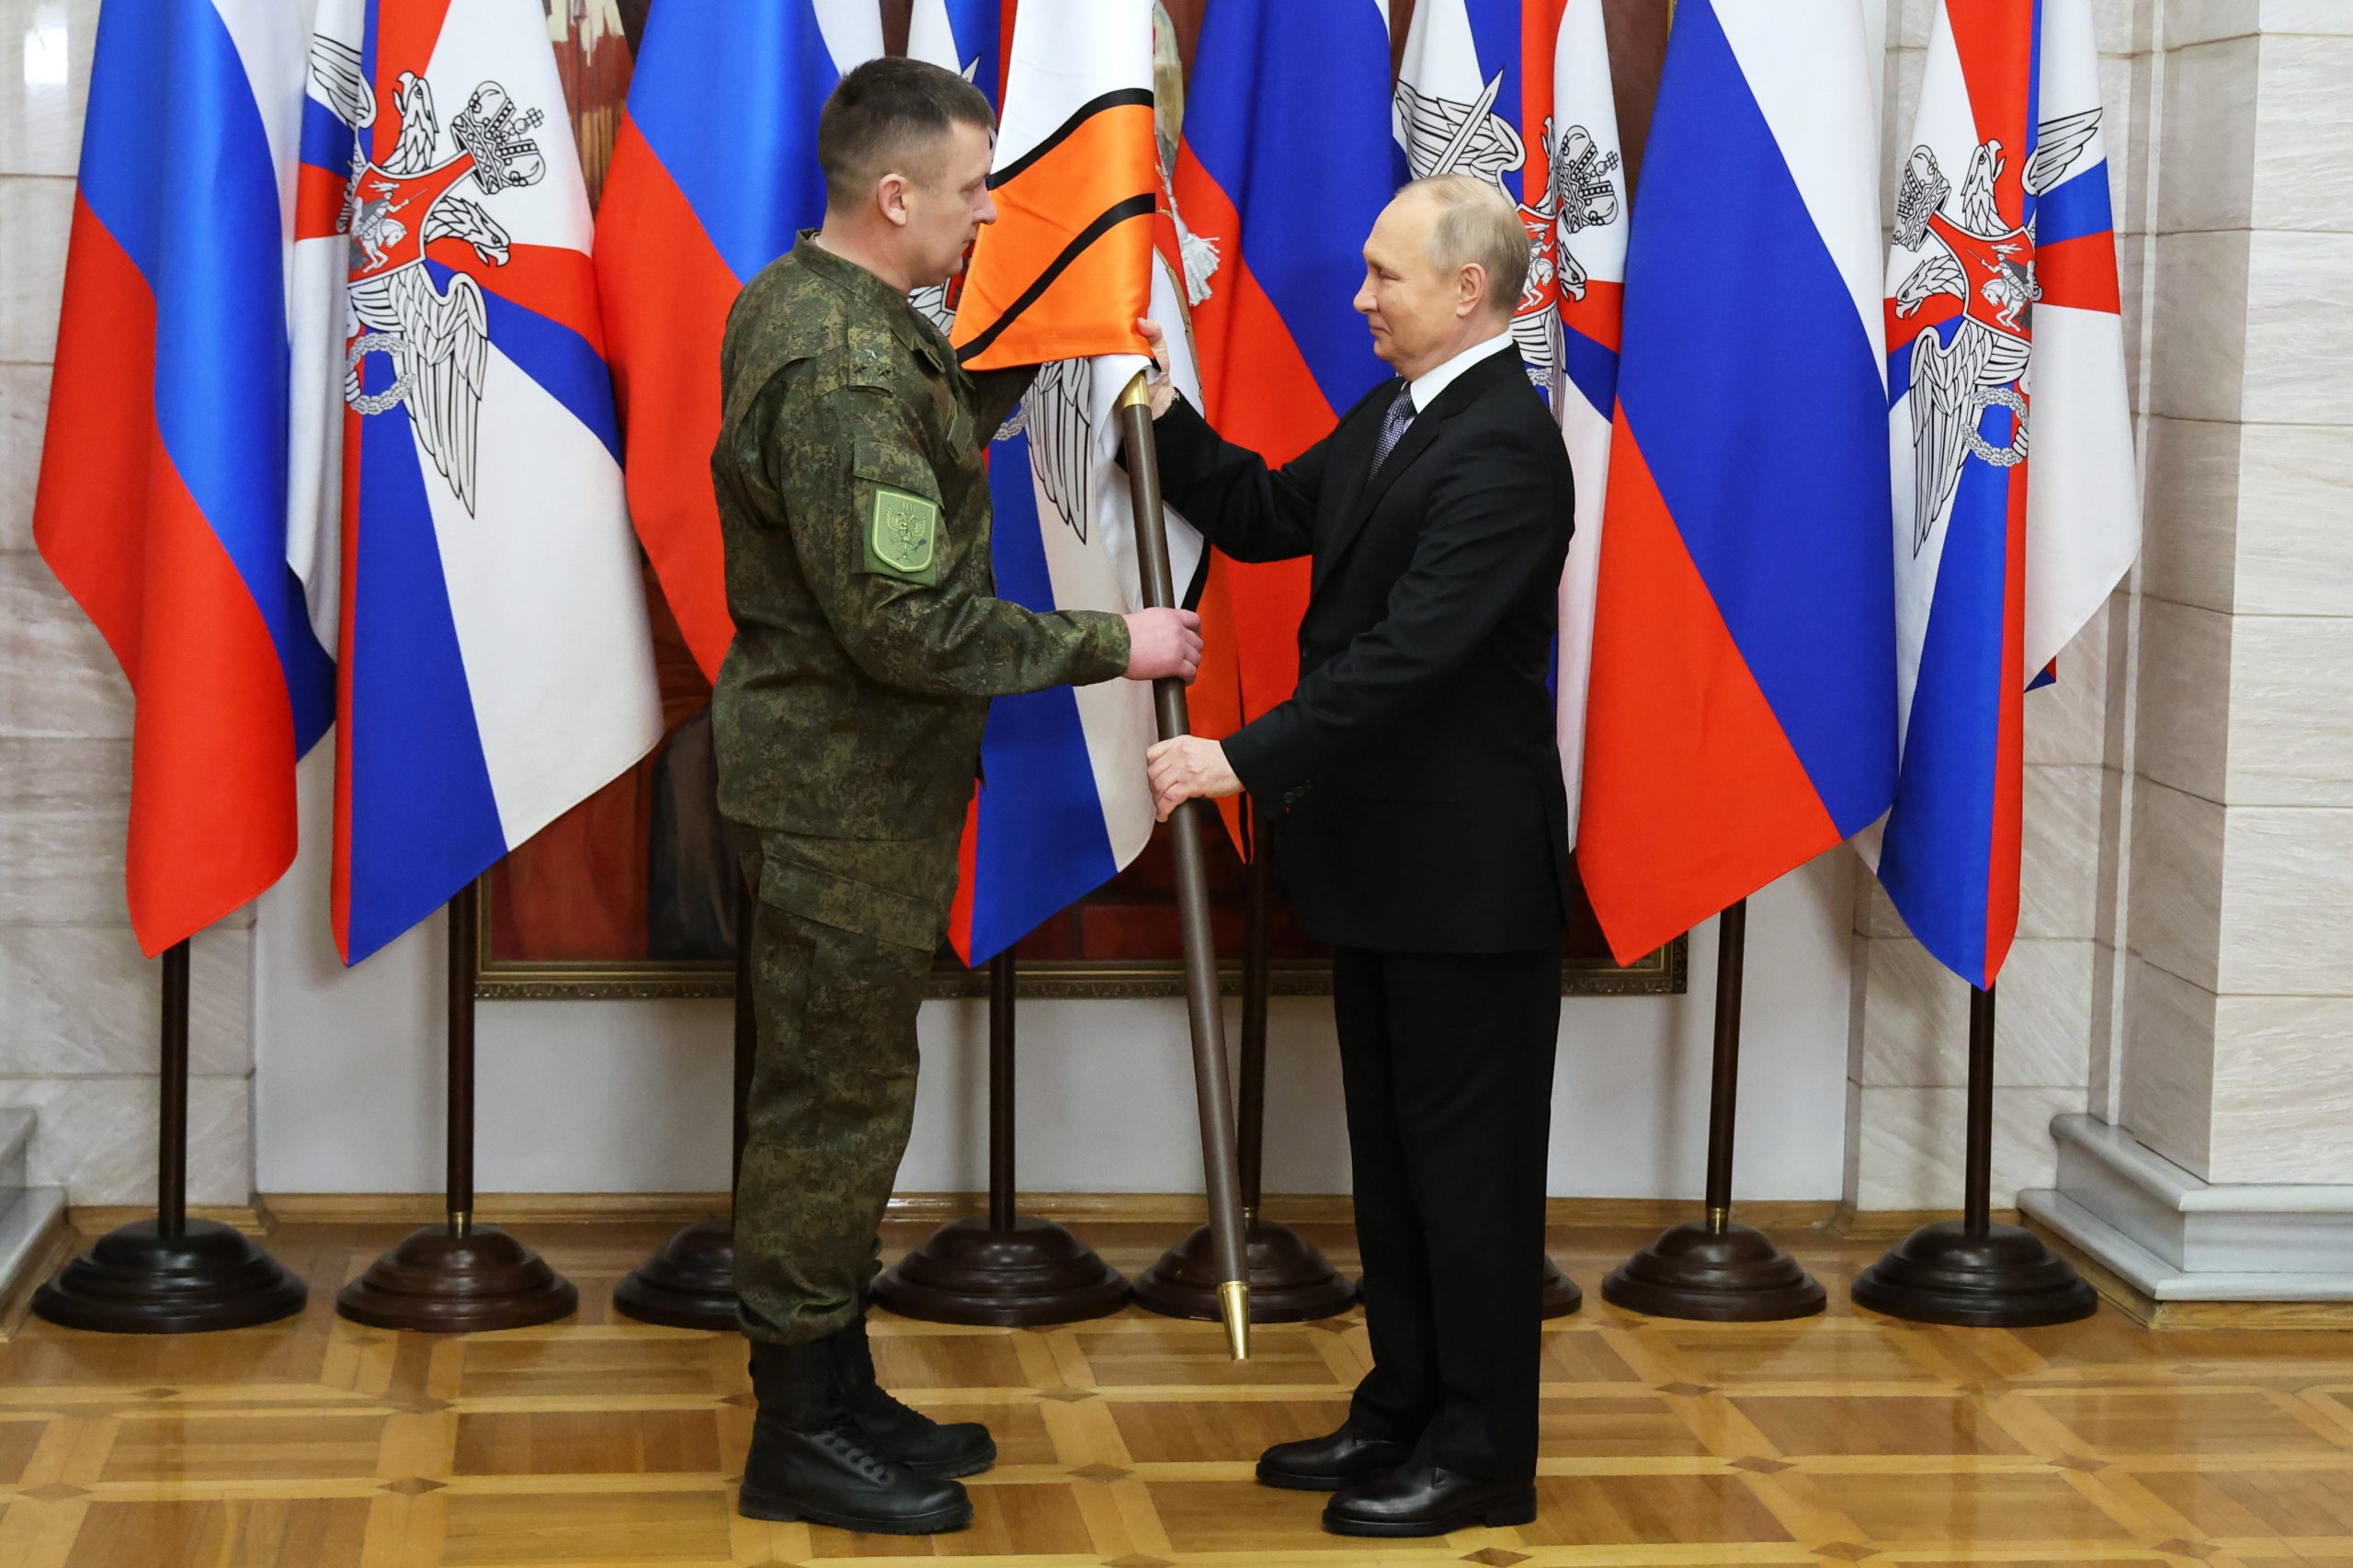 epa10384017 Russian President Vladimir Putin (R) presents the battle banners to an unidentified serviceman for the Donetsk and Luhansk Army Corps during his visit to the Southern Military District, as Russia's so-called "special military operation" continues, at an undisclosed location in Rostov region, Russia, 31 December 2022.  EPA/MIKHAEL KLIMENTYEV/SPUTNIK/KREMLIN POOL / POOL MANDATORY CREDIT